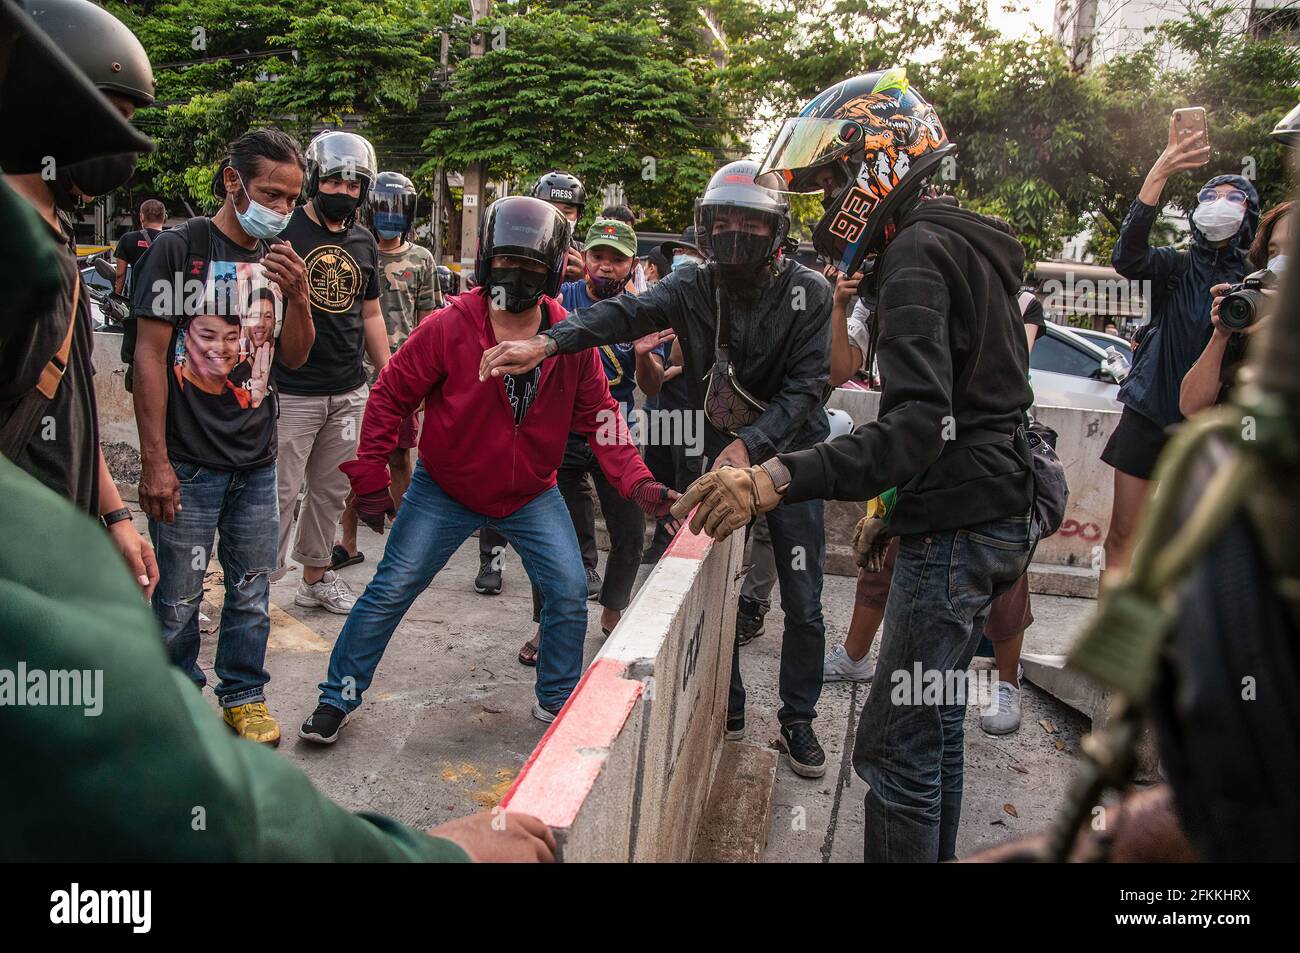 Bangkok, Thailand. 02nd May, 2021. Pro-democracy protesters try to move the barrier during the demonstration. The pro-democracy protesters led by 'REDEM' group gather at the Victory Monument before going by vehicle to the Criminal Court of Thailand to demand the release of detained pro-democracy activists who were detained by the lese majeste law (article 112 of the Thai criminal code). Credit: SOPA Images Limited/Alamy Live News Stock Photo